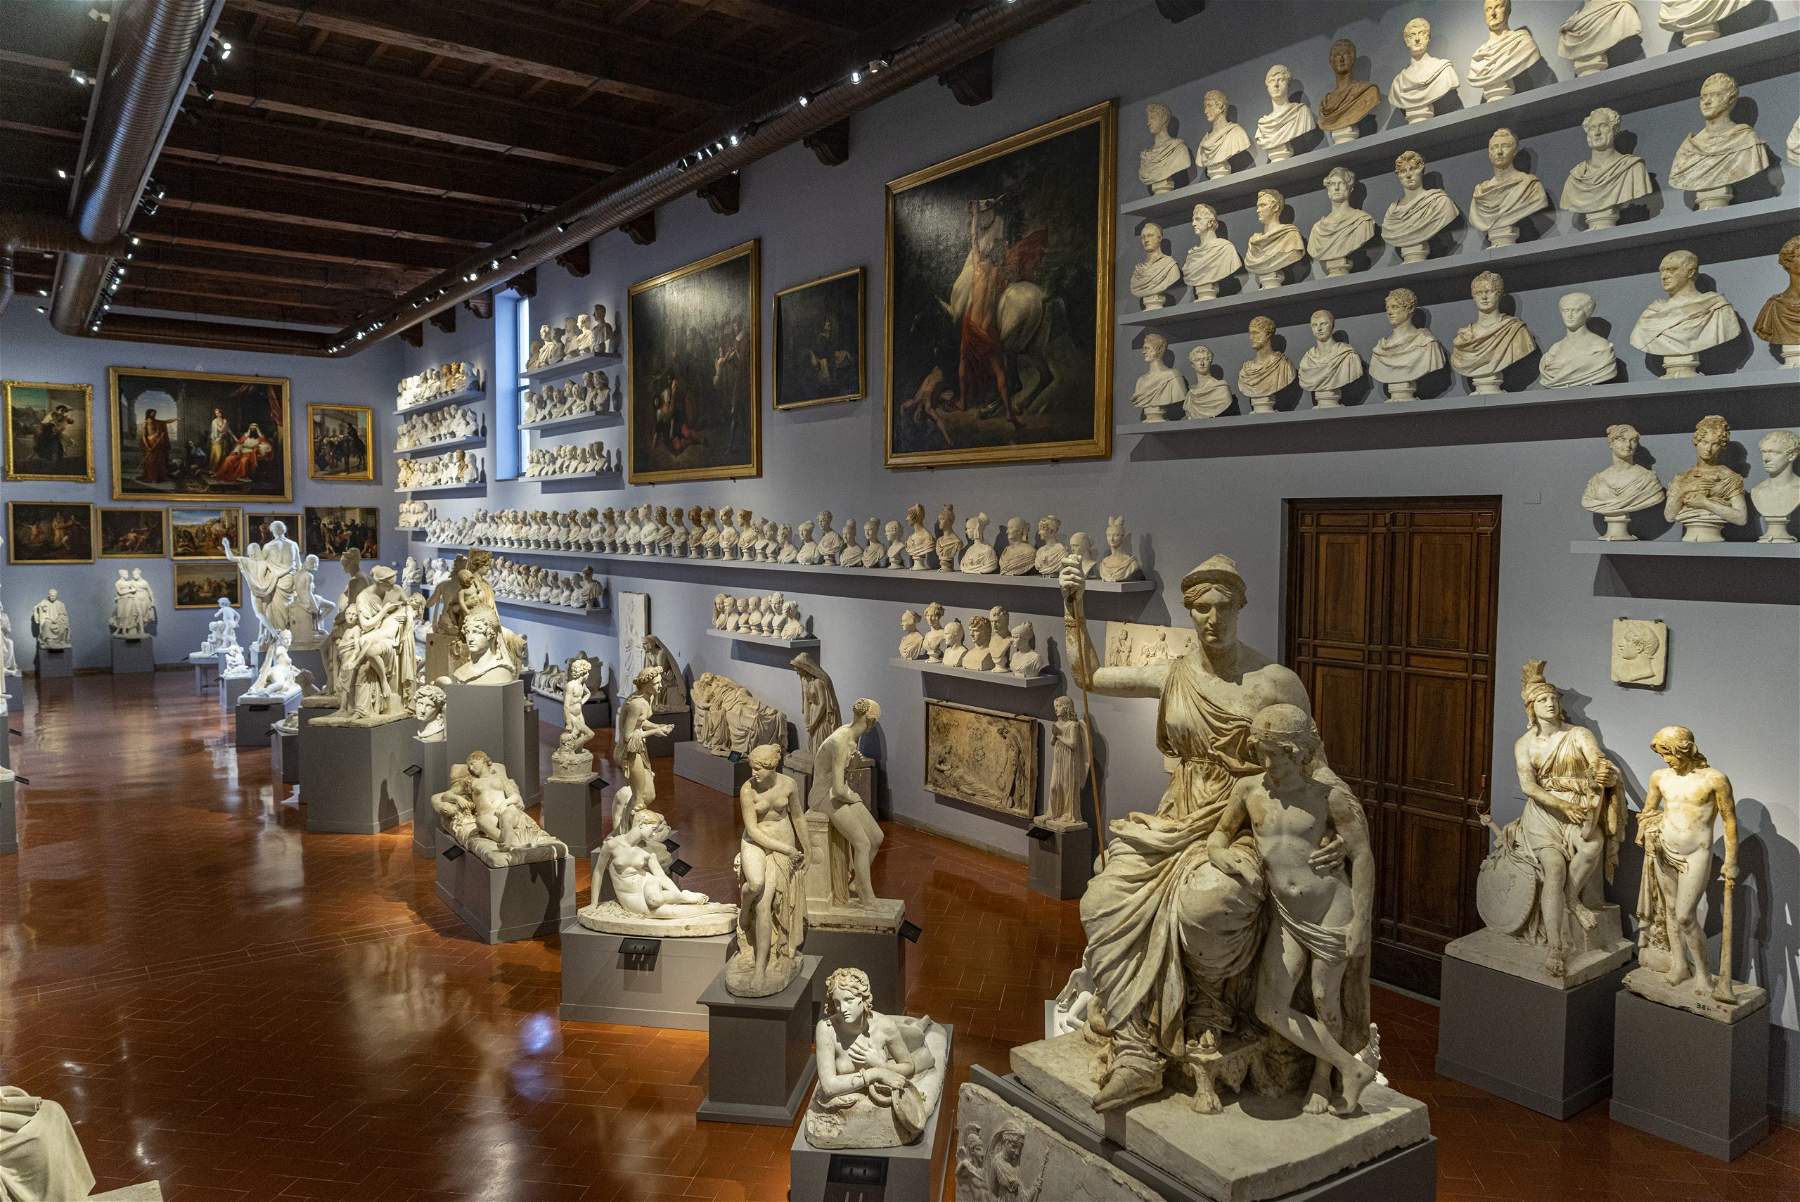 Florence, results of analysis on Bartolini's plaster casts presented